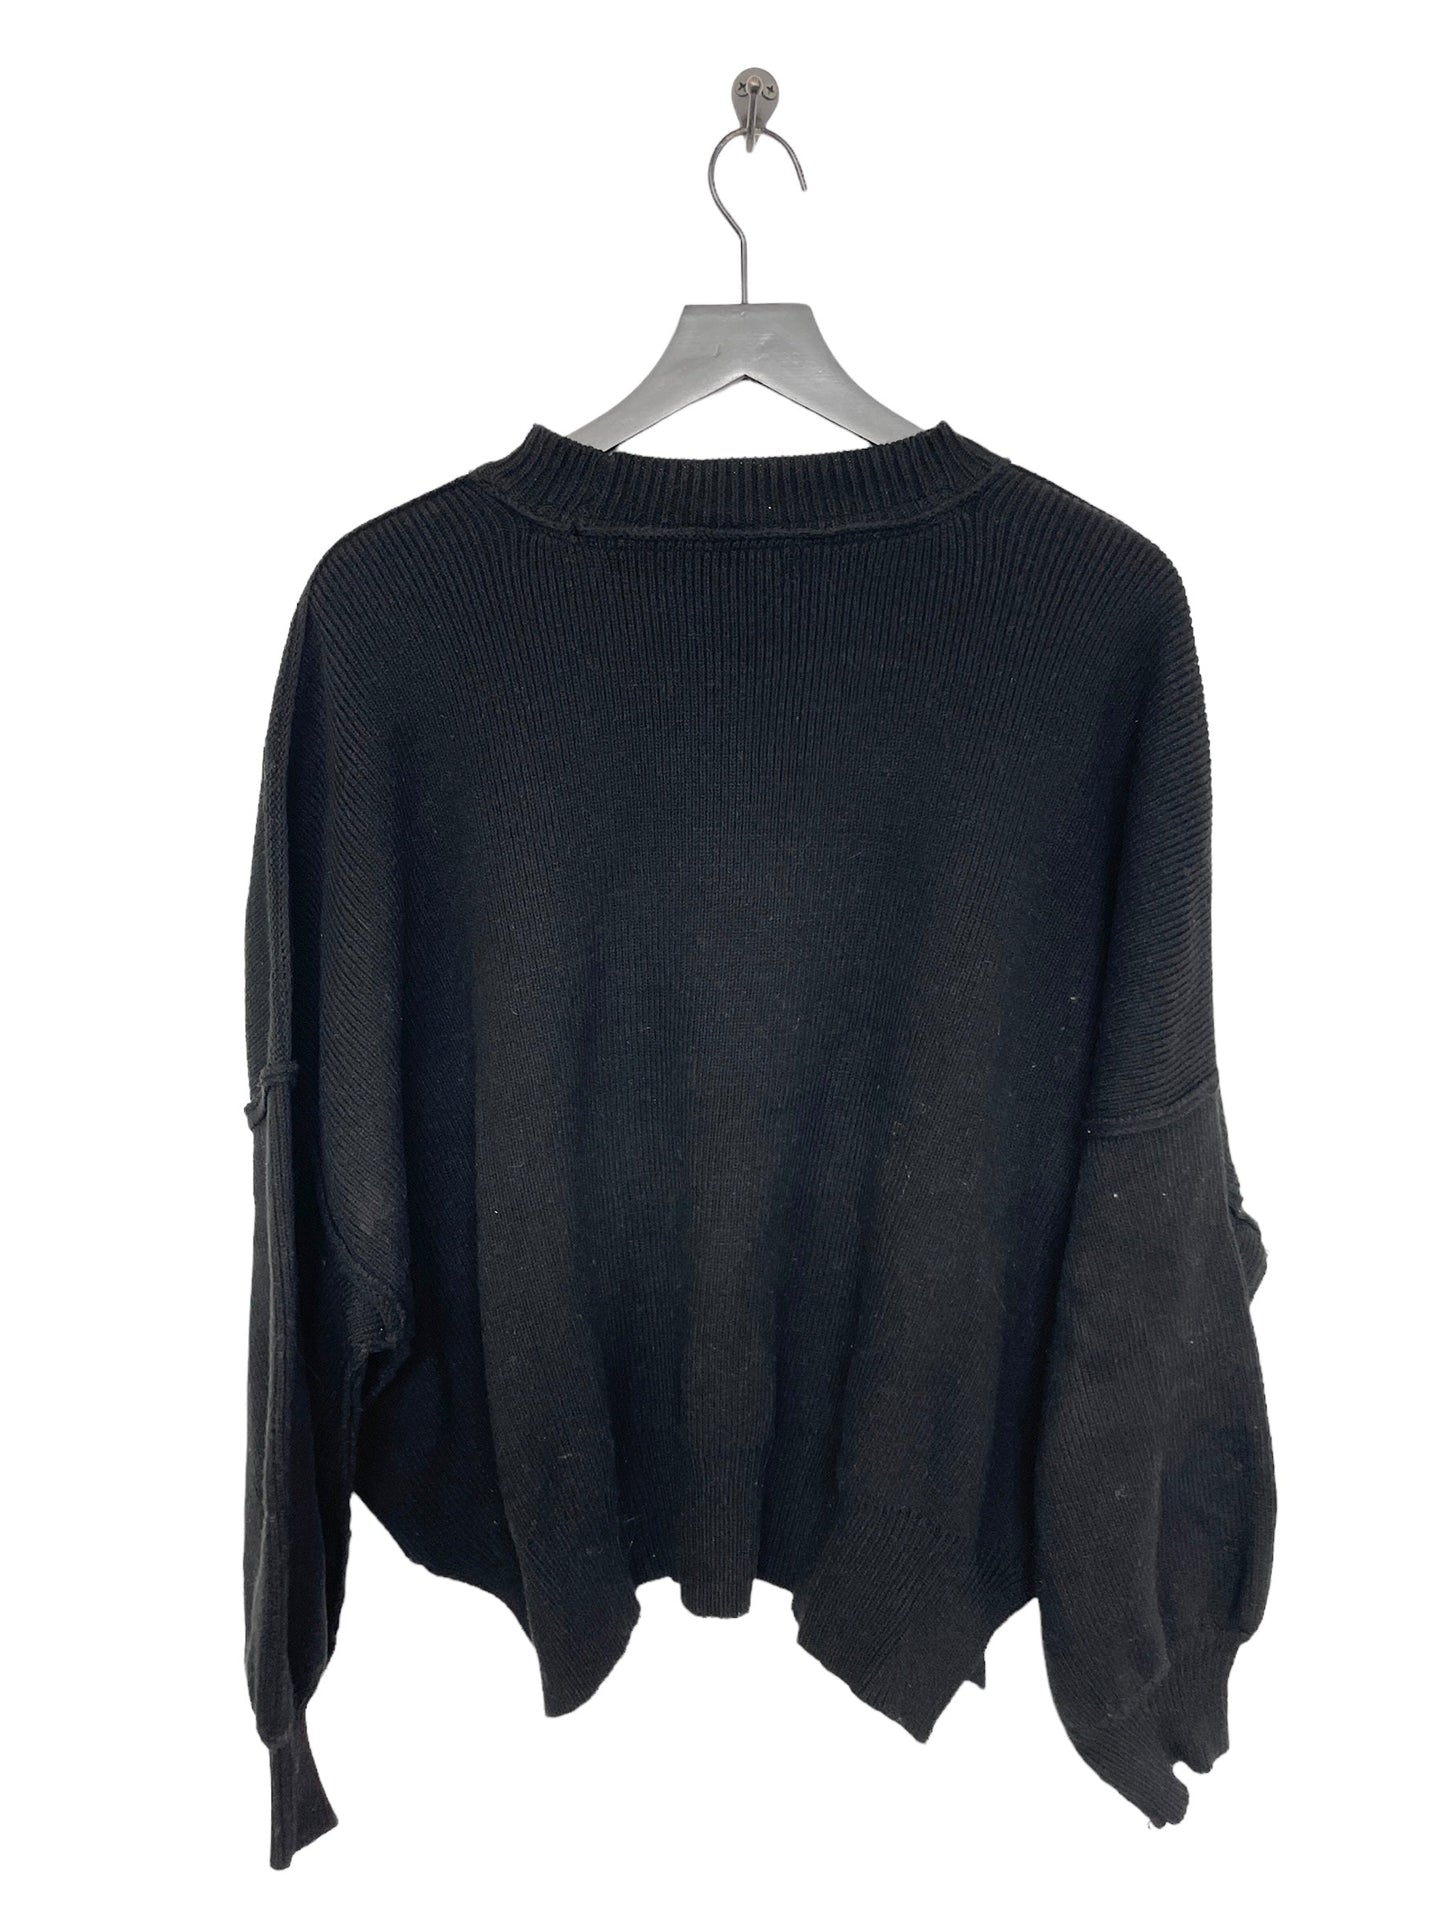 Black Sweater Clothes Mentor, Size M